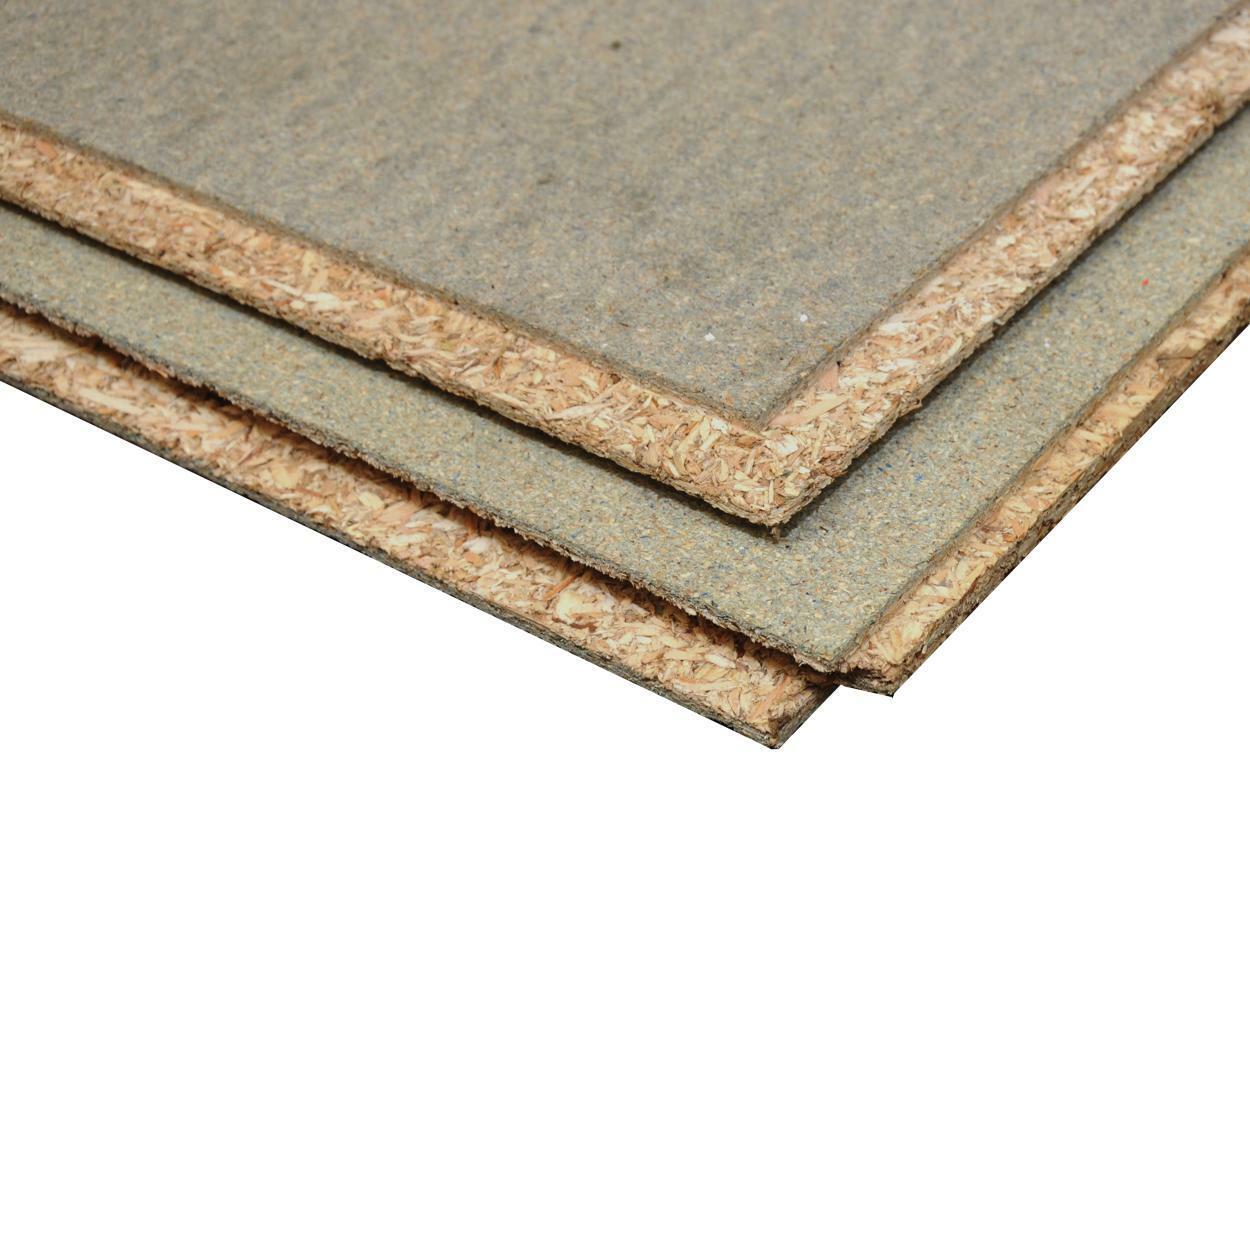 P5 Tongue and Groove Chipboard Flooring